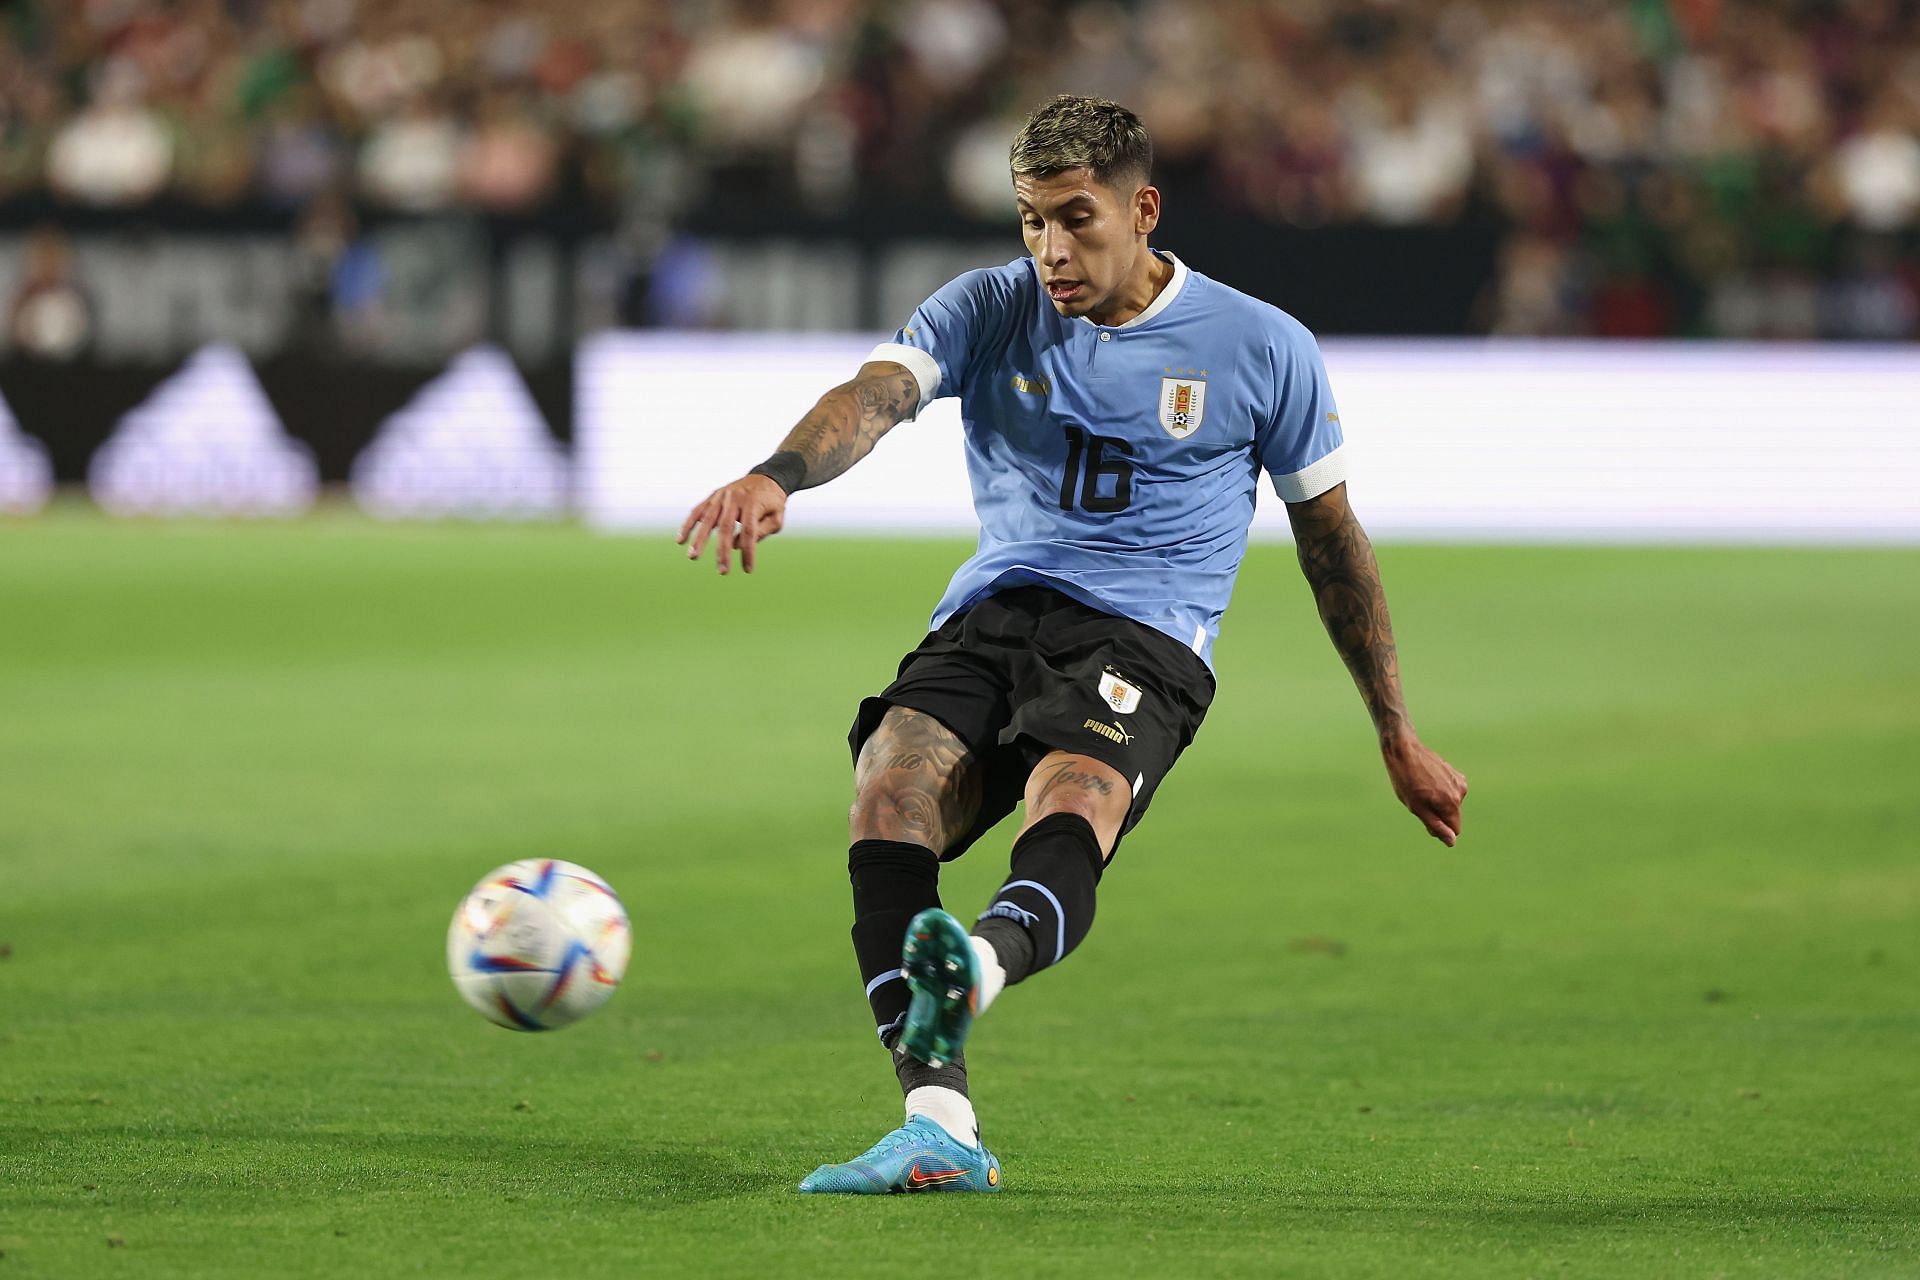 Uruguay take on Panama in a friendly fixture on Saturday